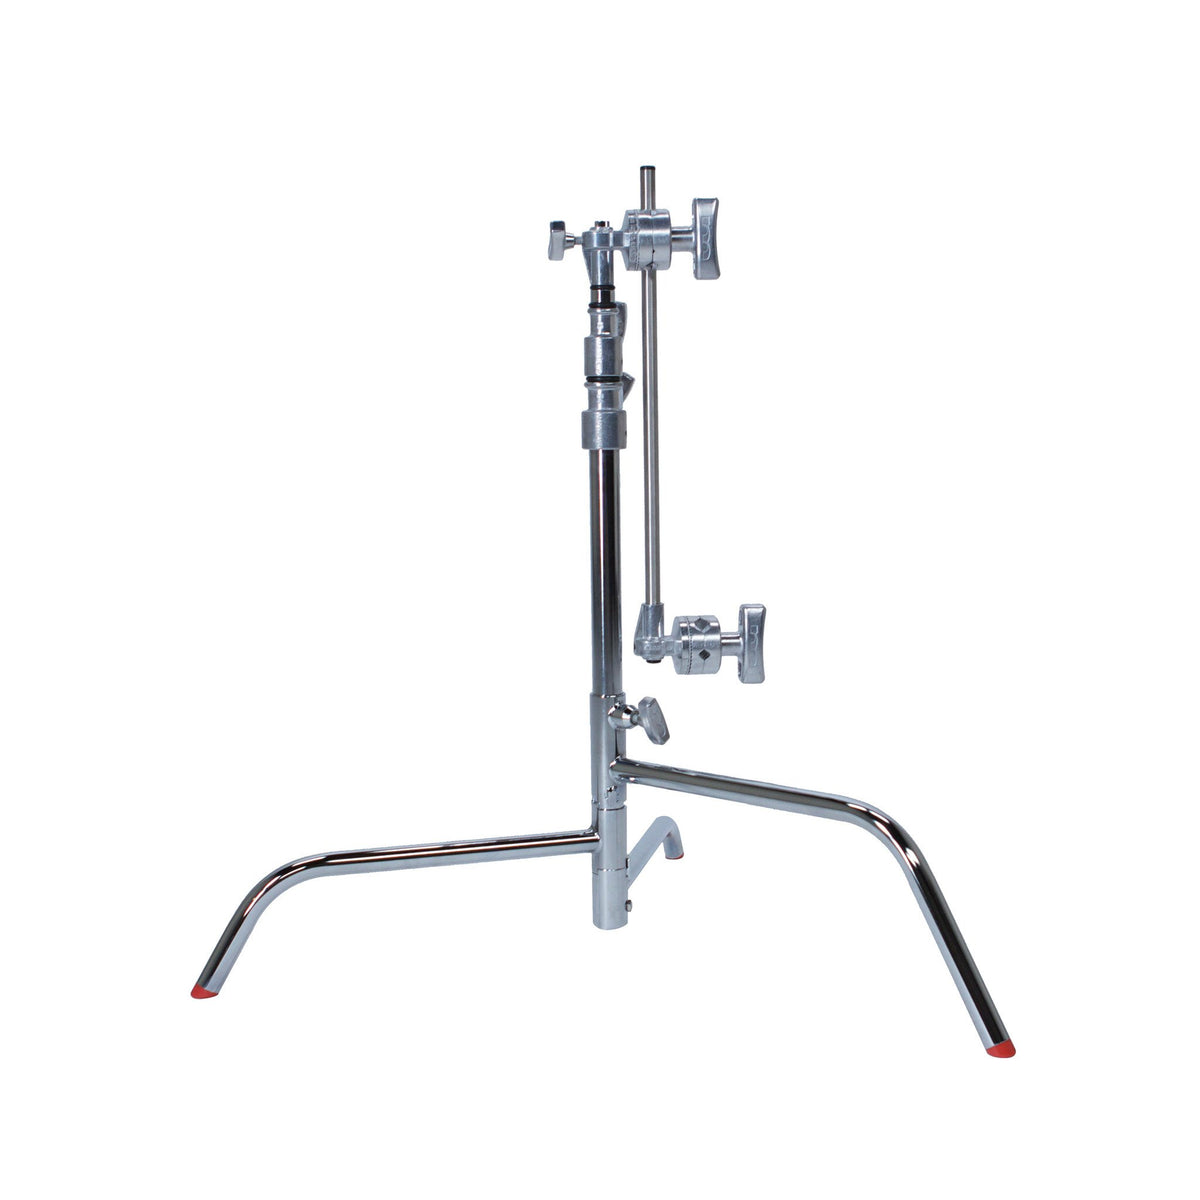 Hollywood Pro 20 C-Stand w/Sliding Leg, Low Profile, Includes Grip He –  msegrip